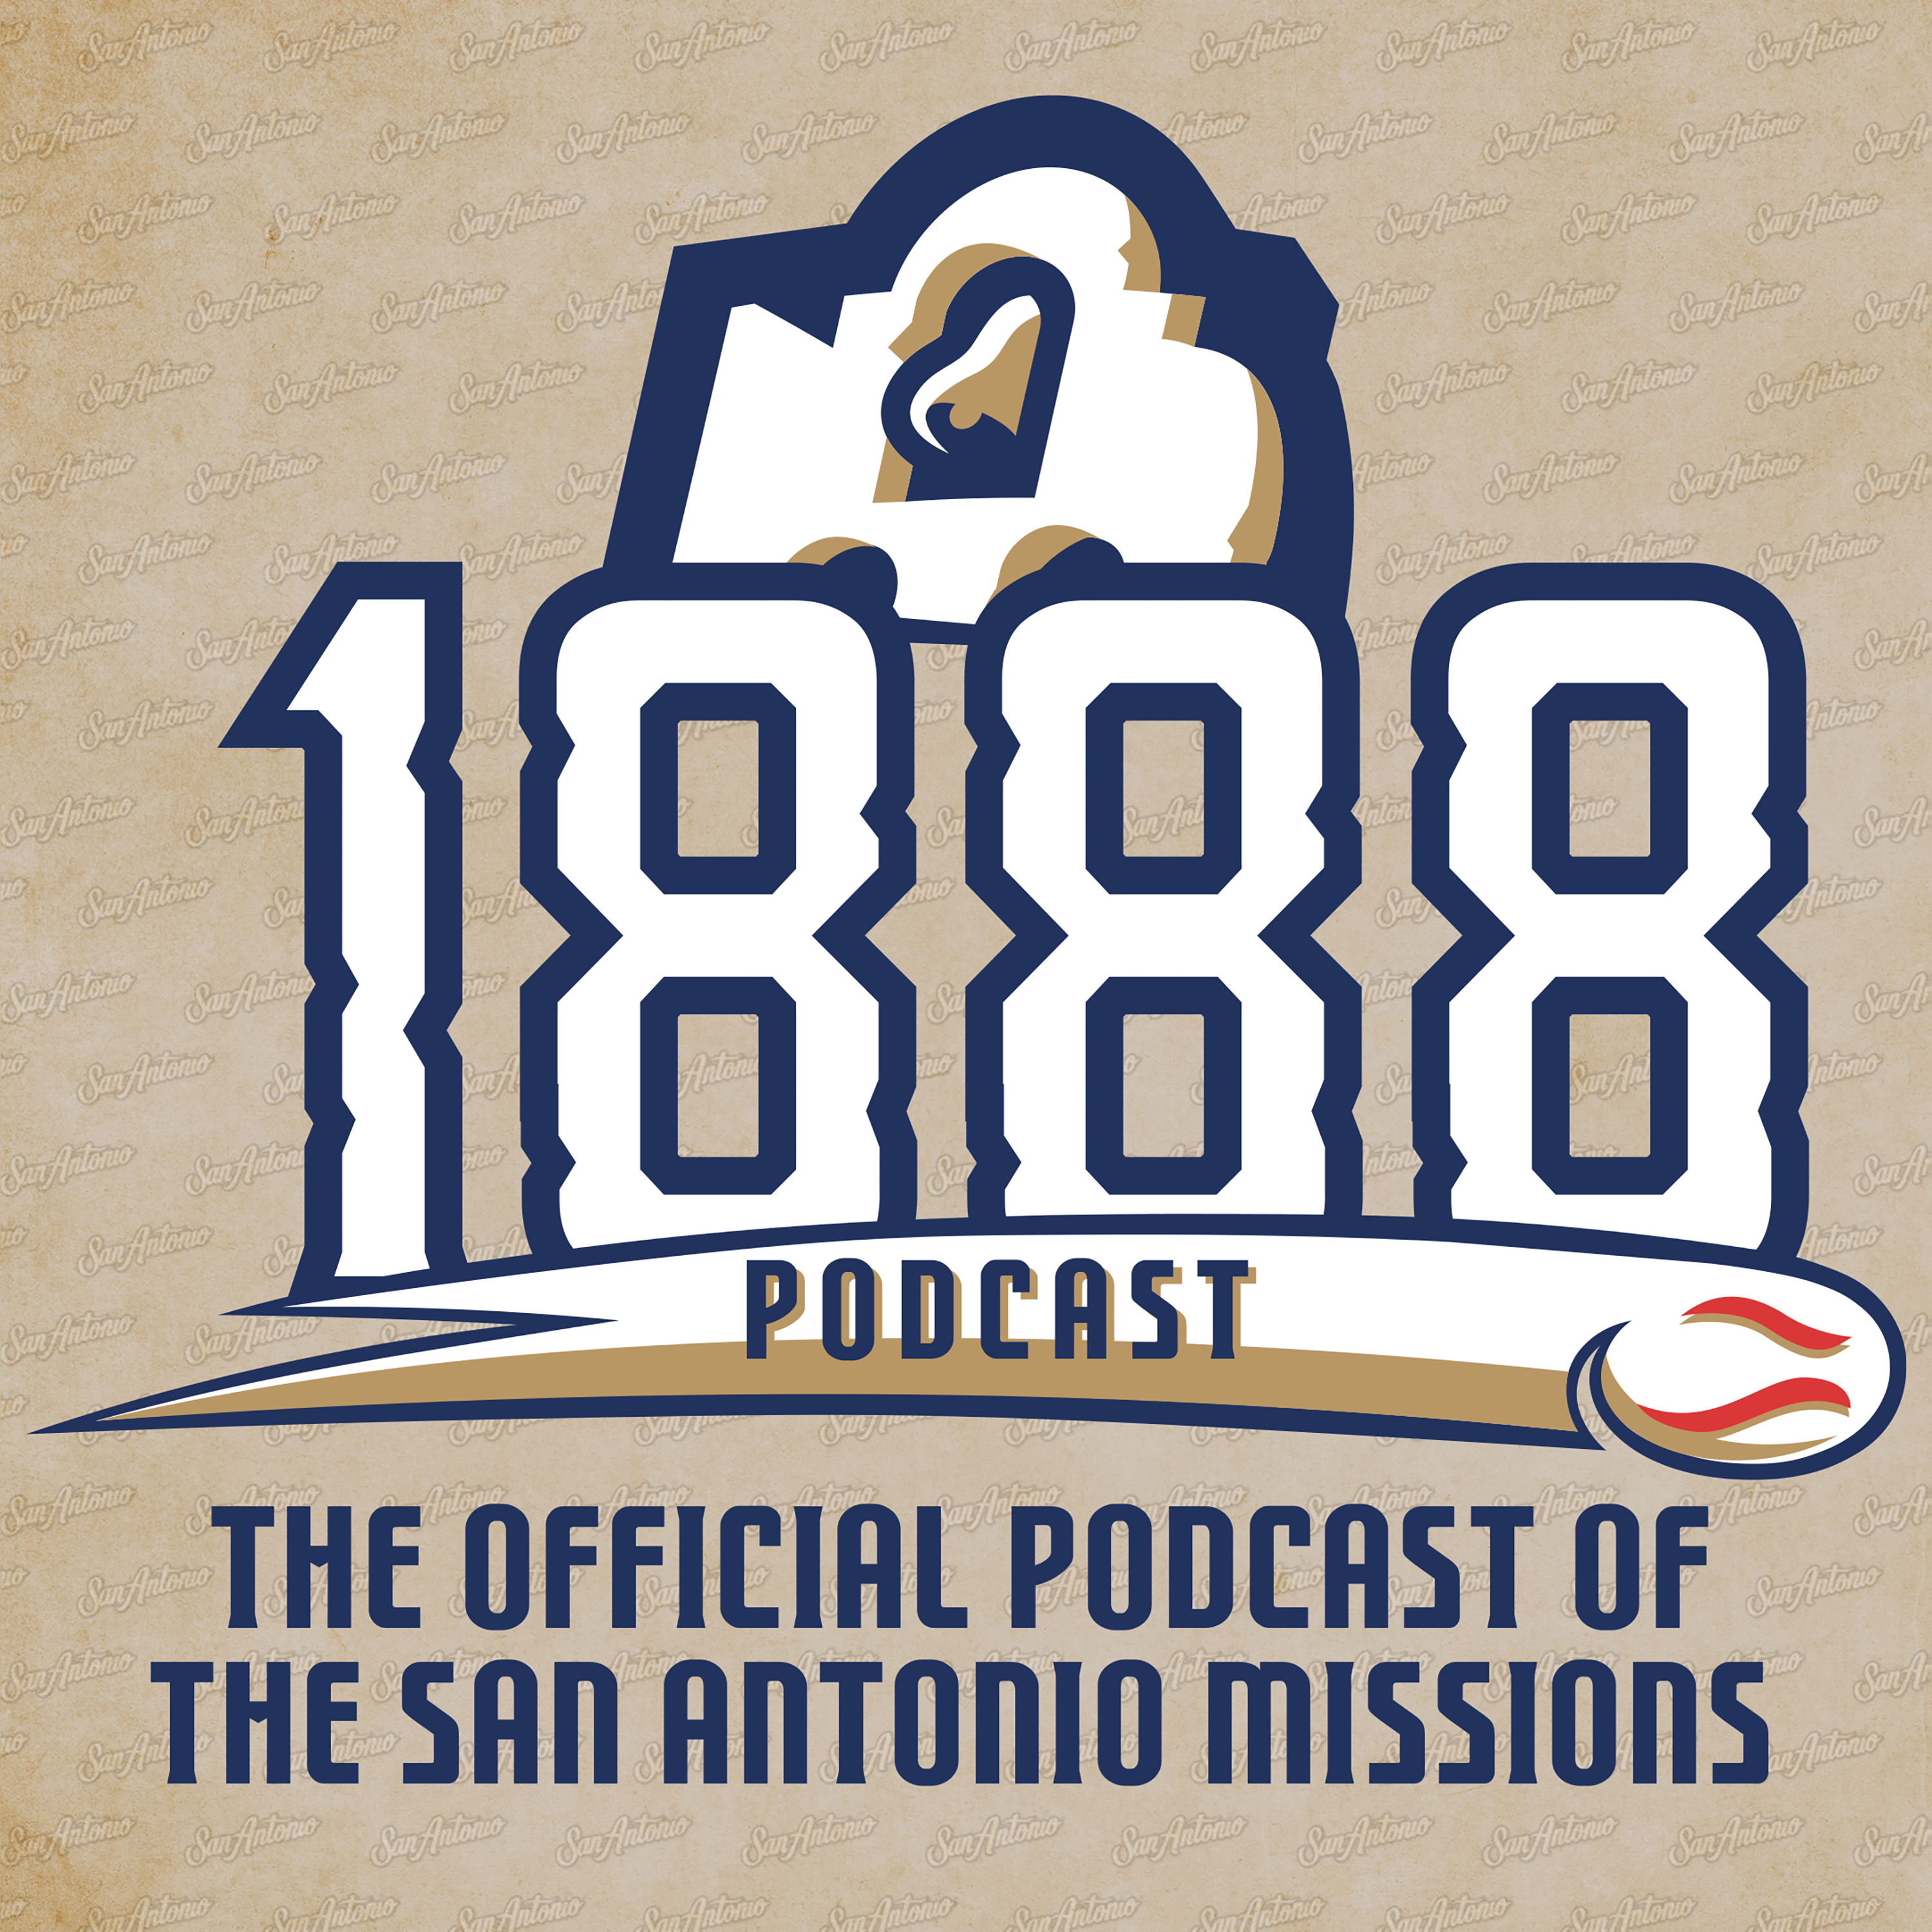 1888 - The Official Podcast of the San Antonio Missions